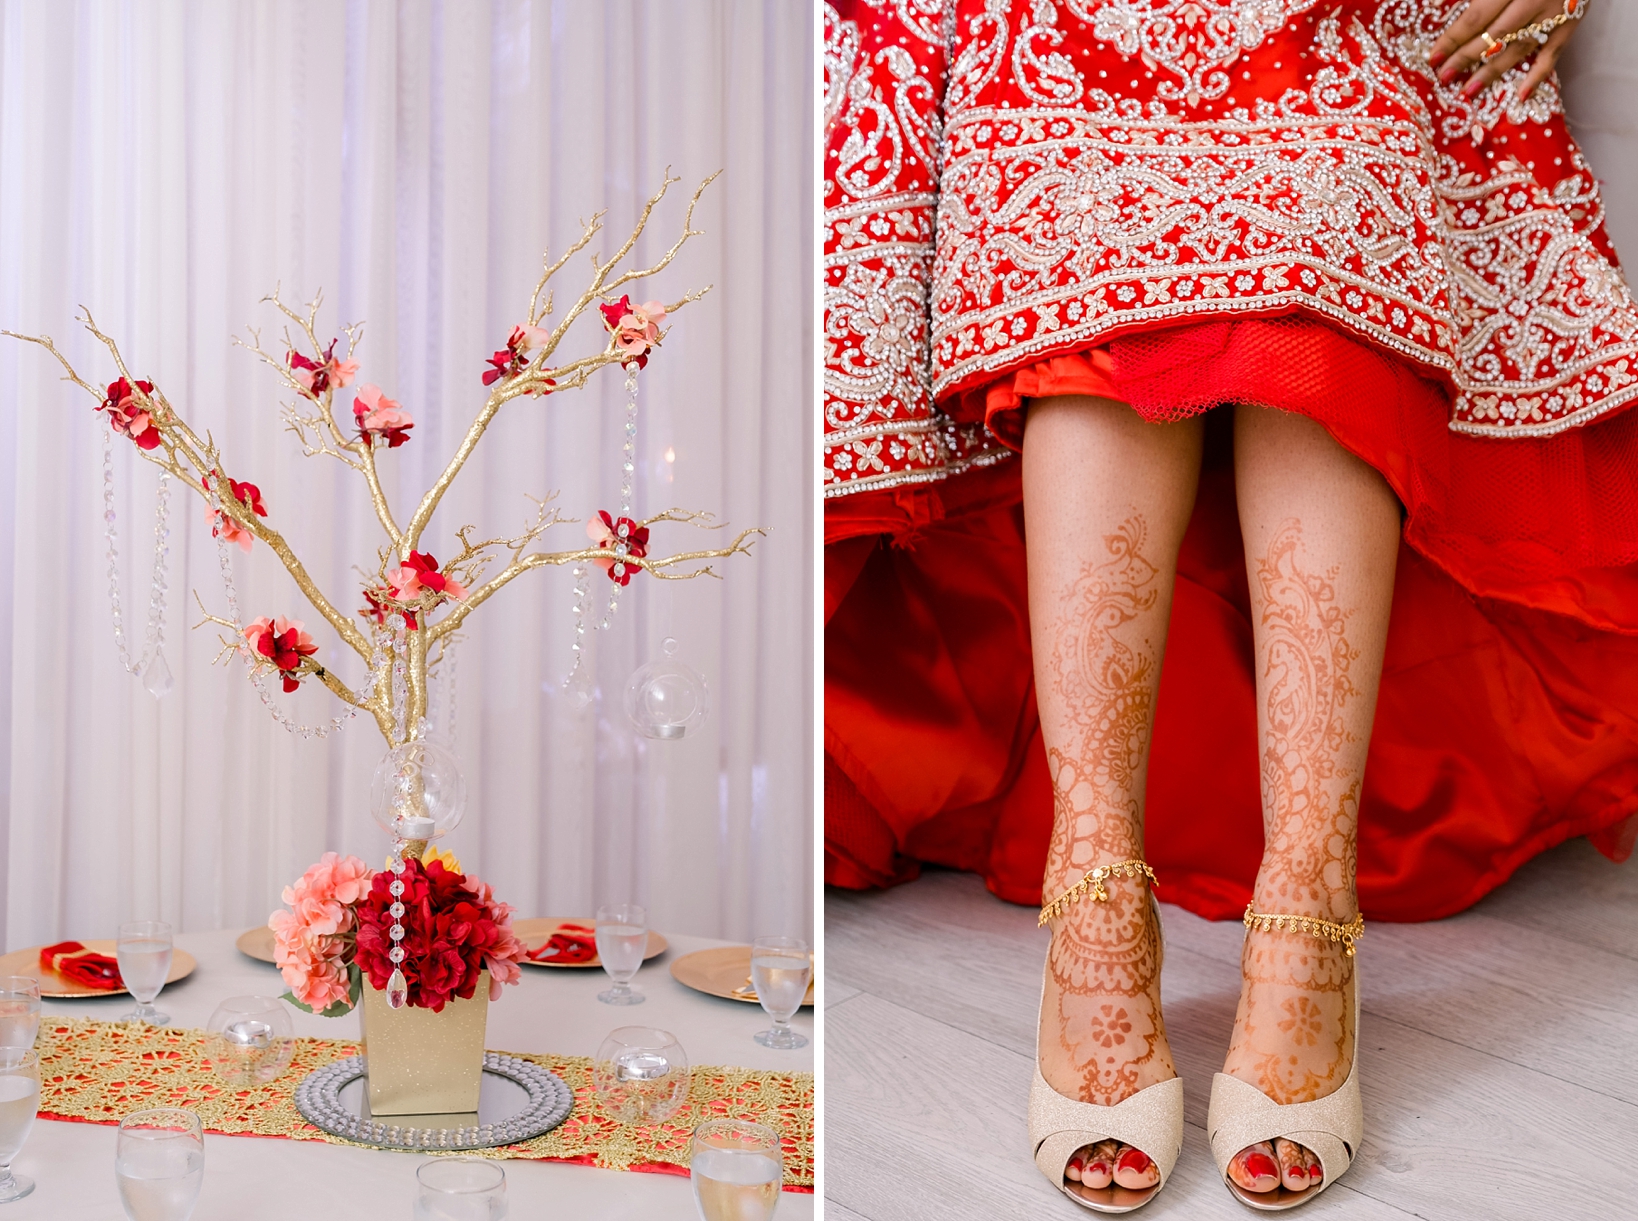 Centerpiece detail of flowers and gold branches and the henna tattoo details of the bride's legs